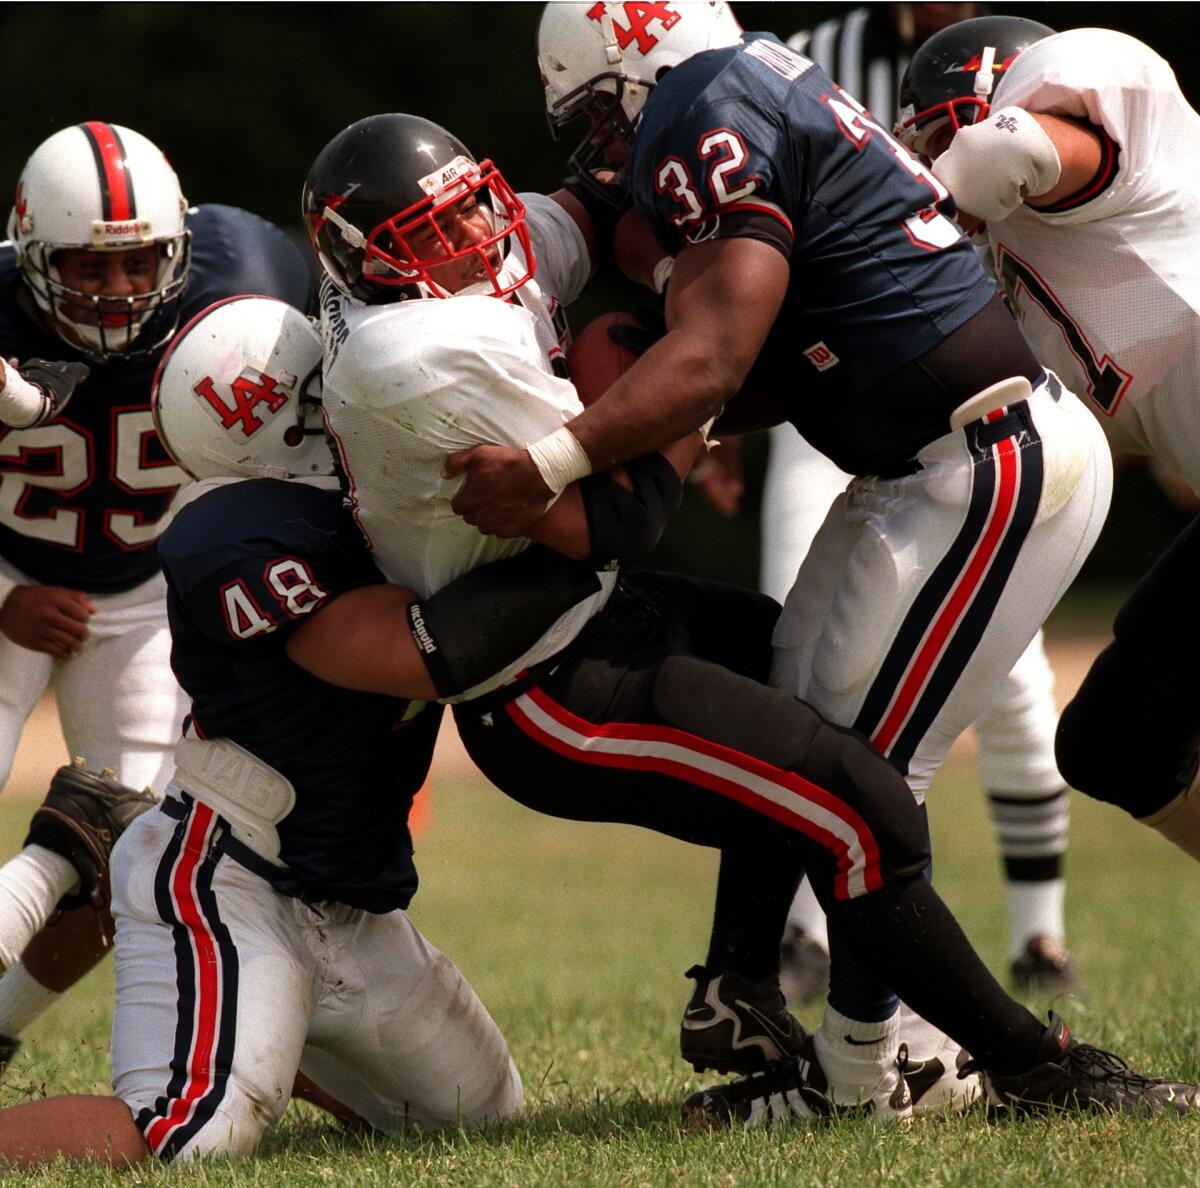 A runner is tackled by multiple defenders in a football game.